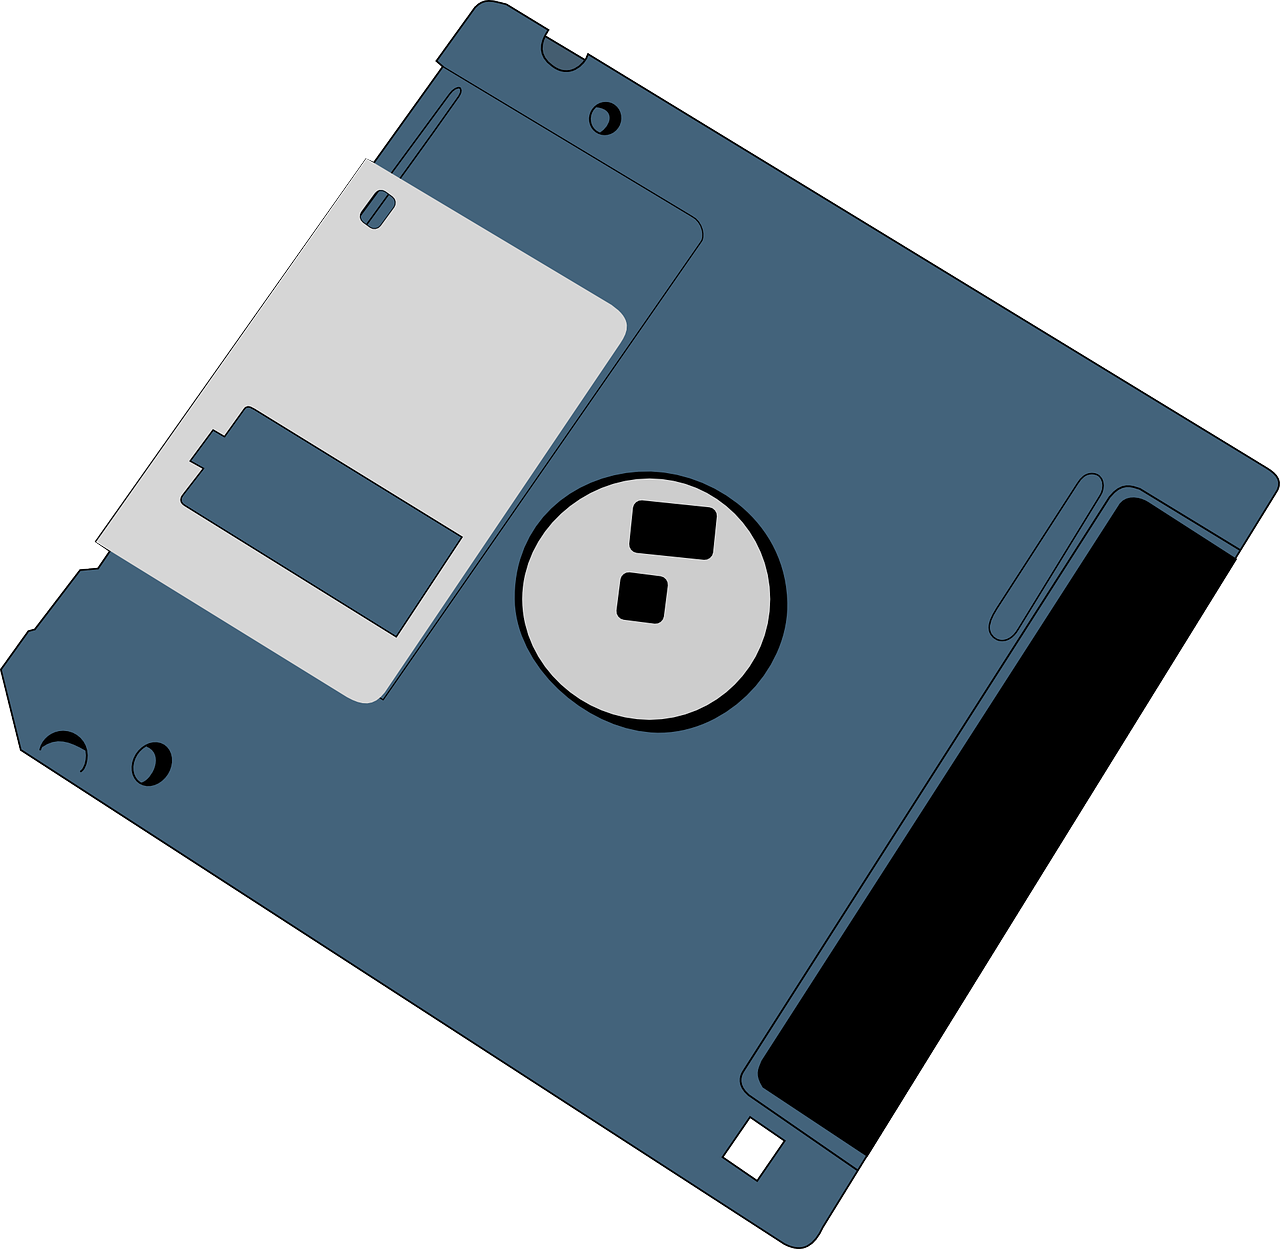 What is the largest capacity floppy disk? 